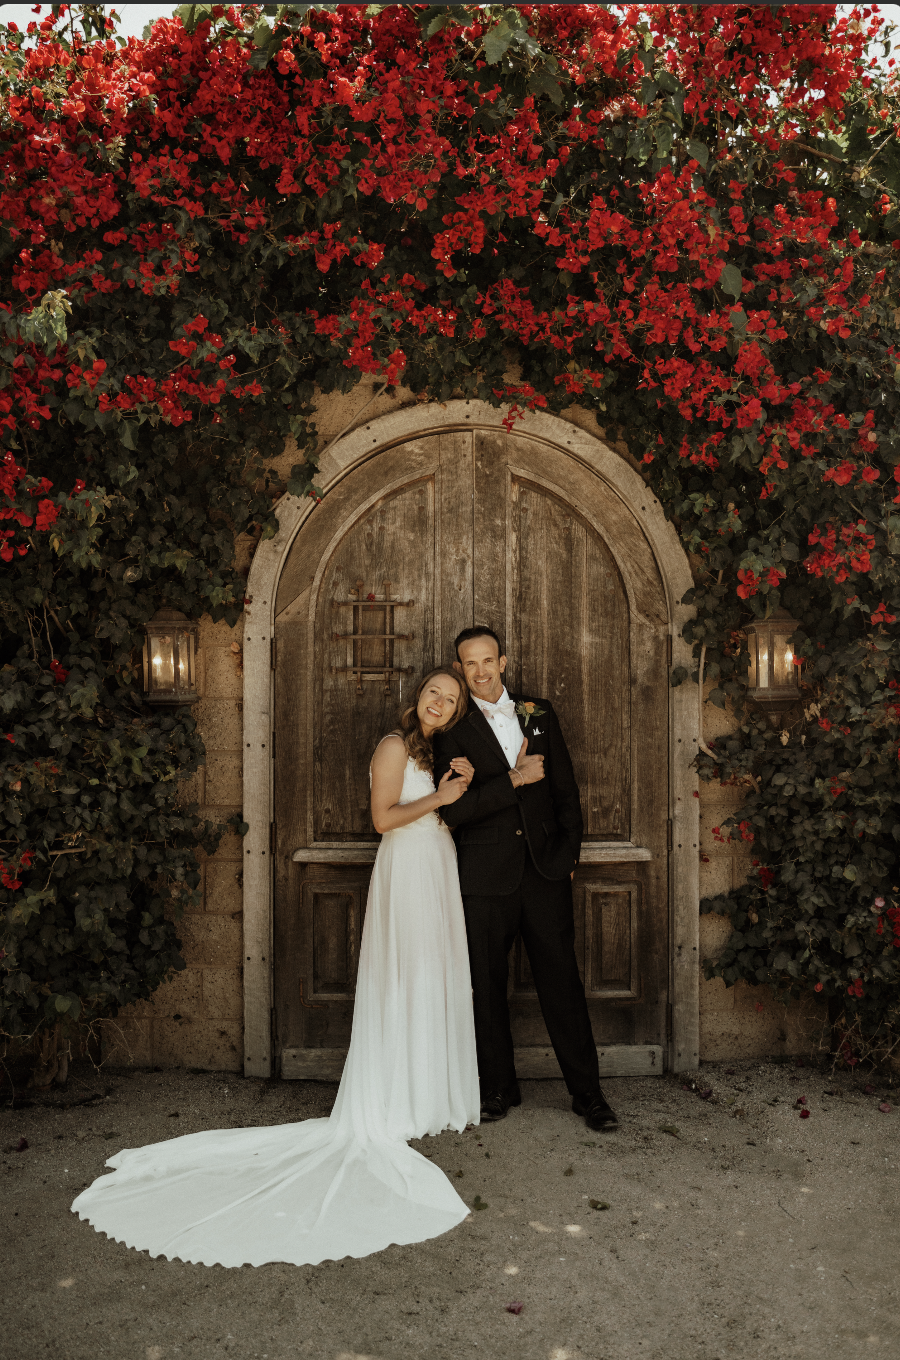 catalina view gardens made the perfect backdrop for this LA couple's dream wedding